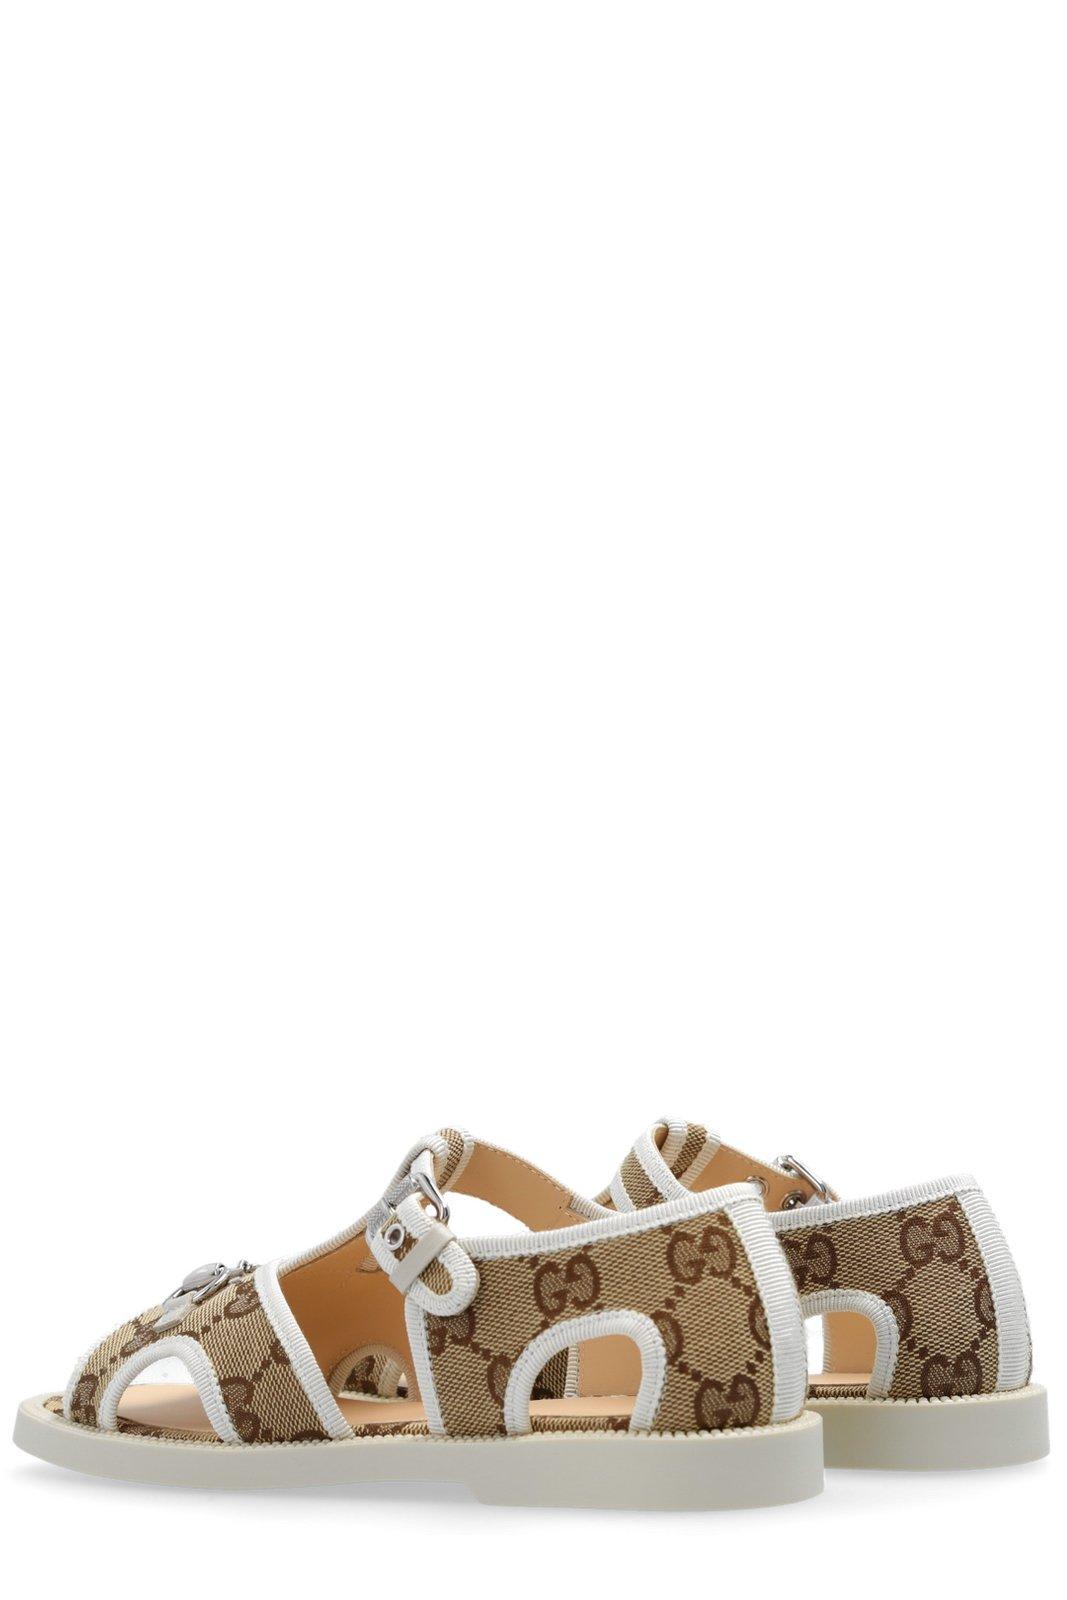 Shop Gucci Buckled Open Toe Sandals In Bianco